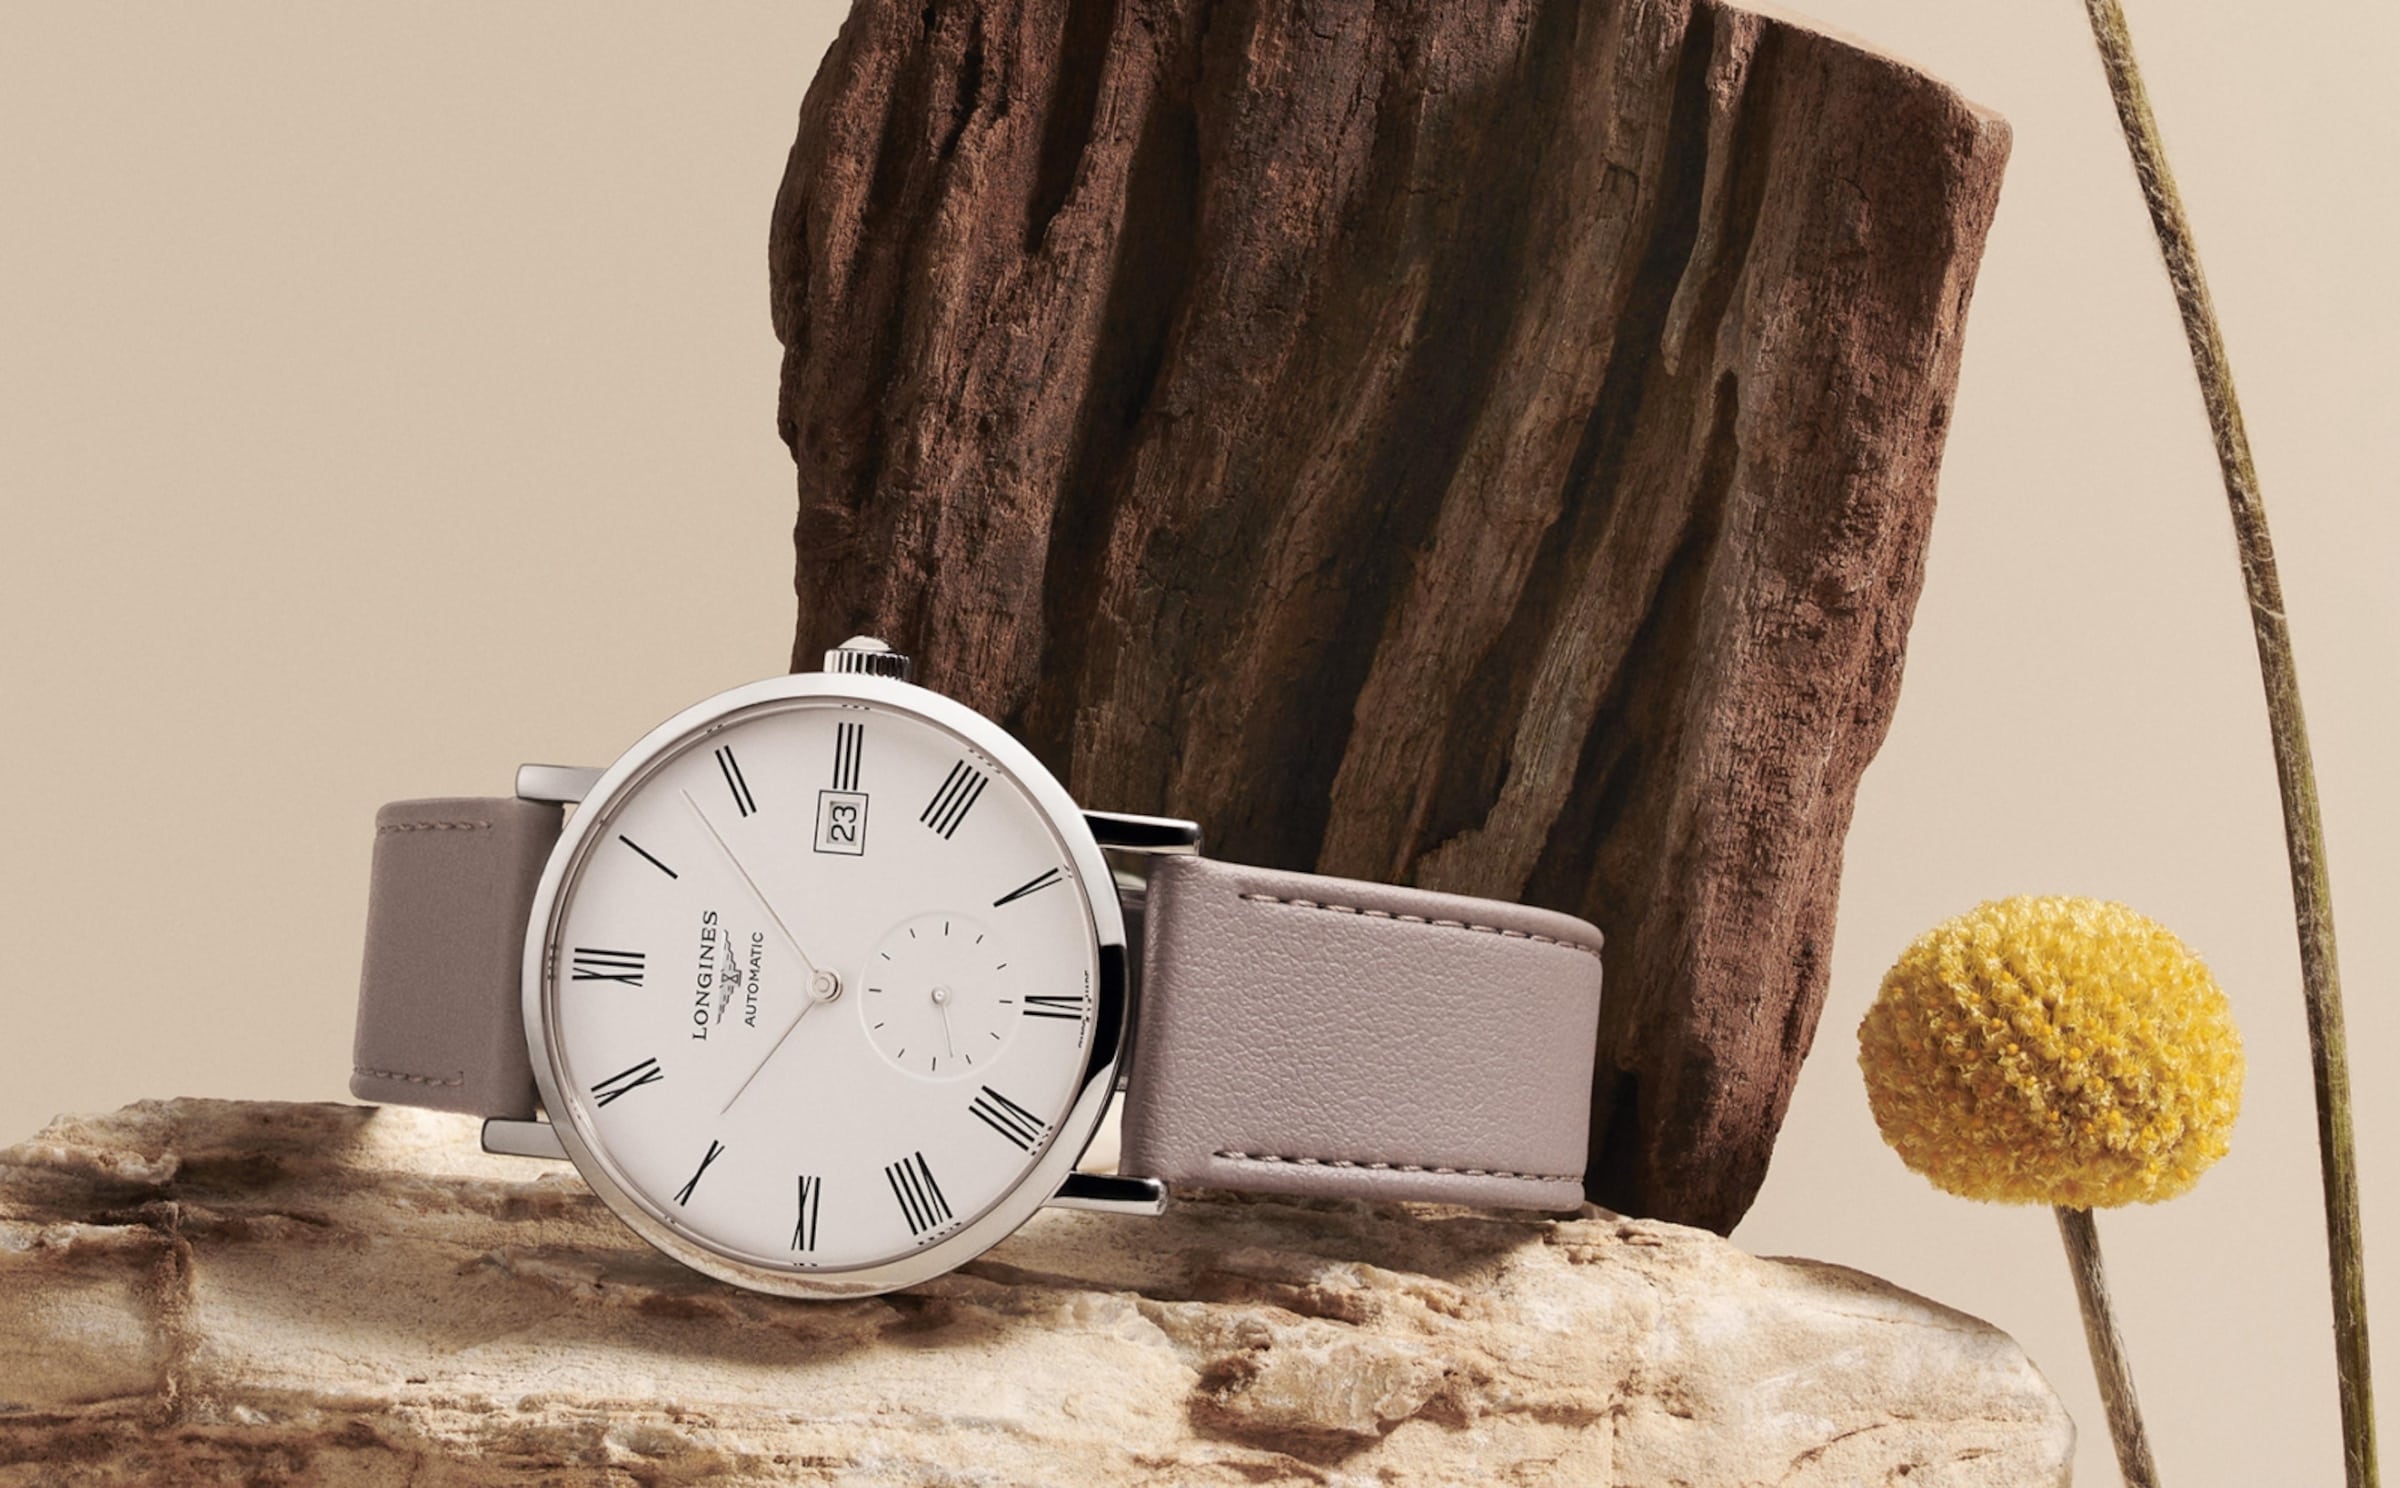 The Longines Elegant Collection watch in natural environment